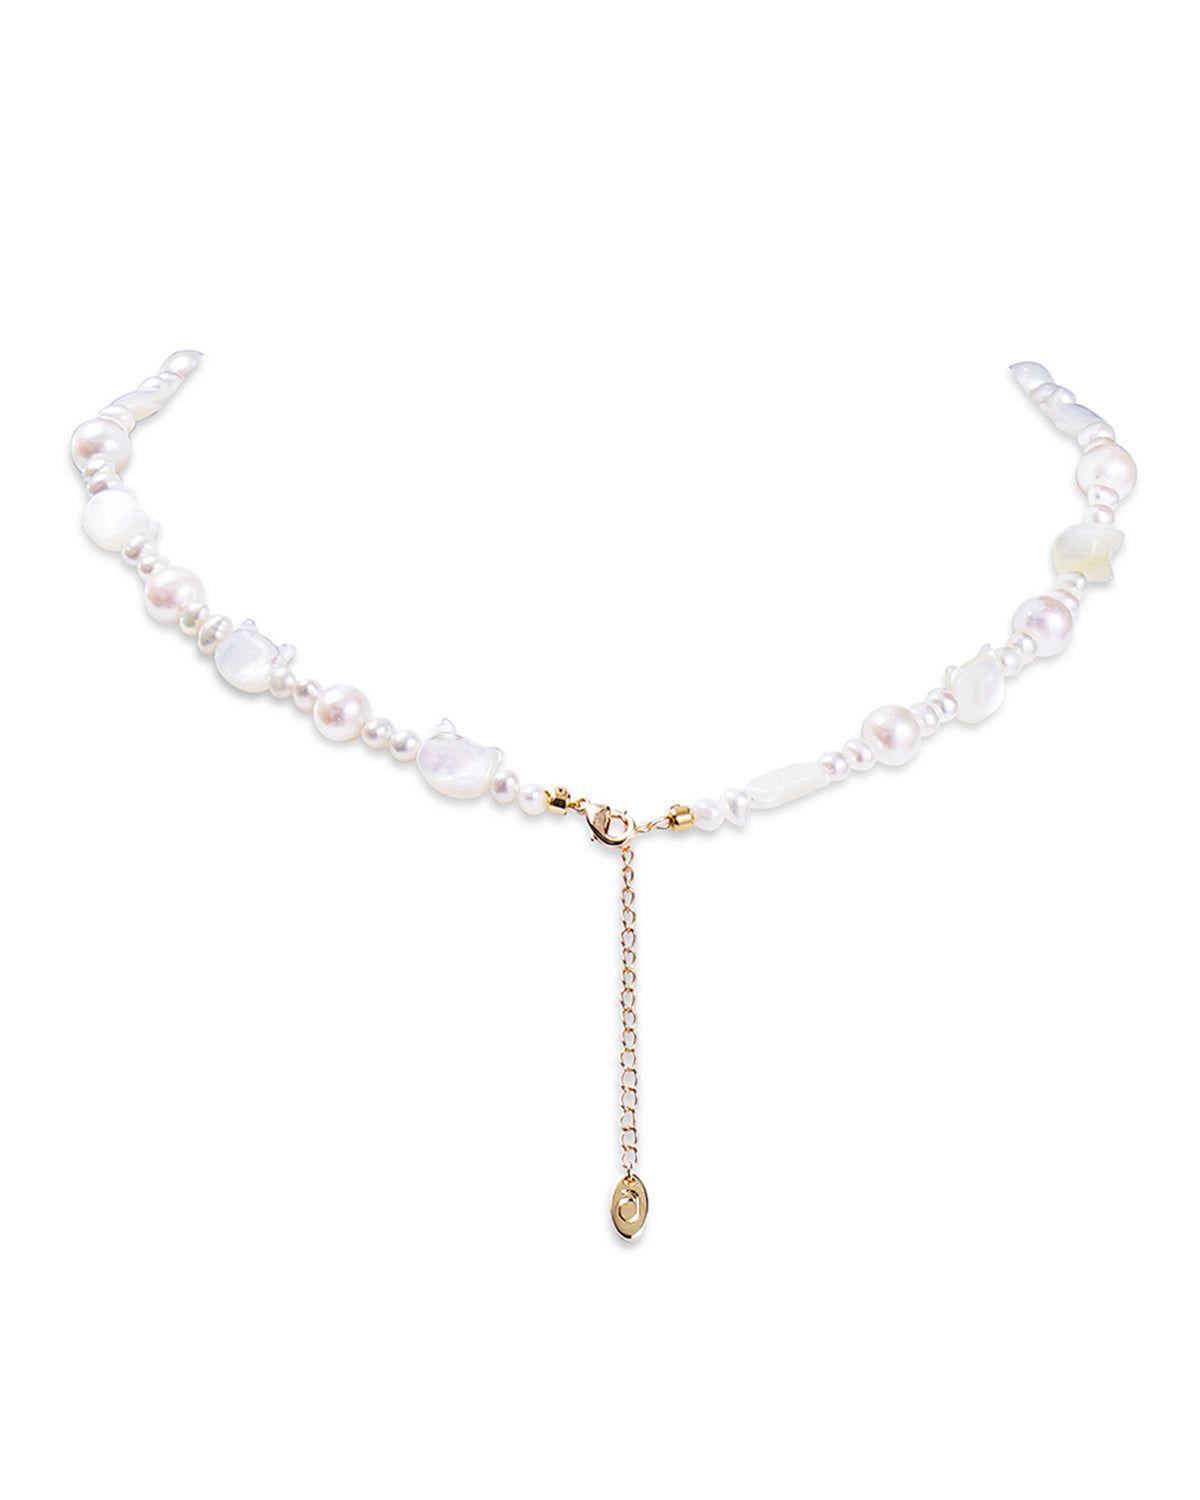 4.0-9.0mm Baroque Freshwater Pearl Kitten Necklace